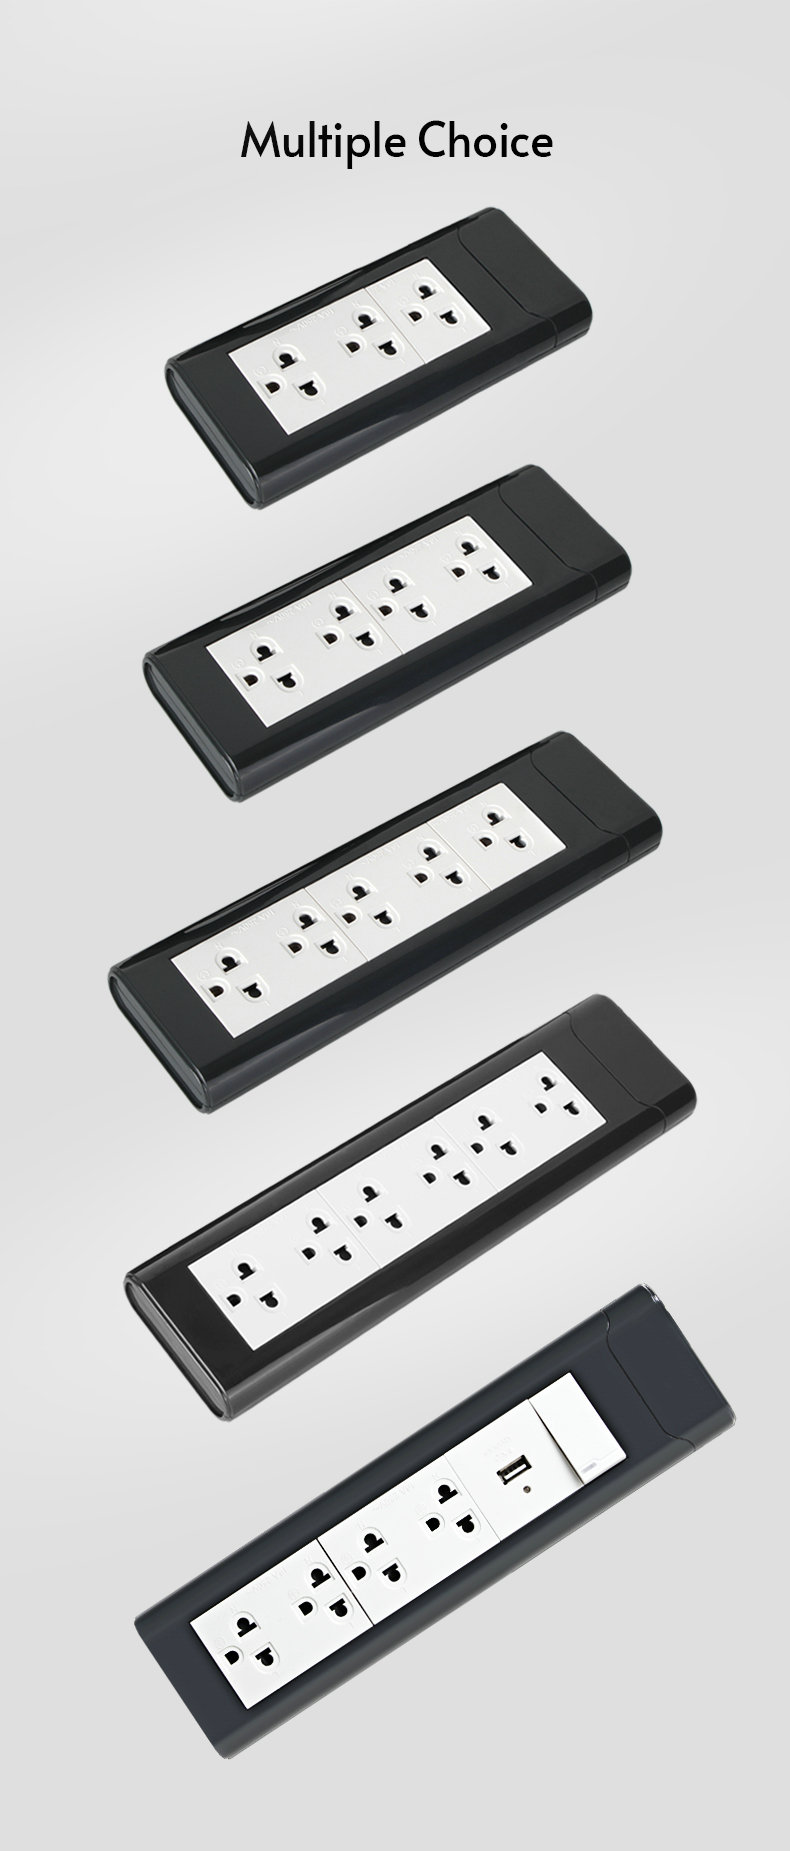 6 Outlet Surge Protector Power Strip